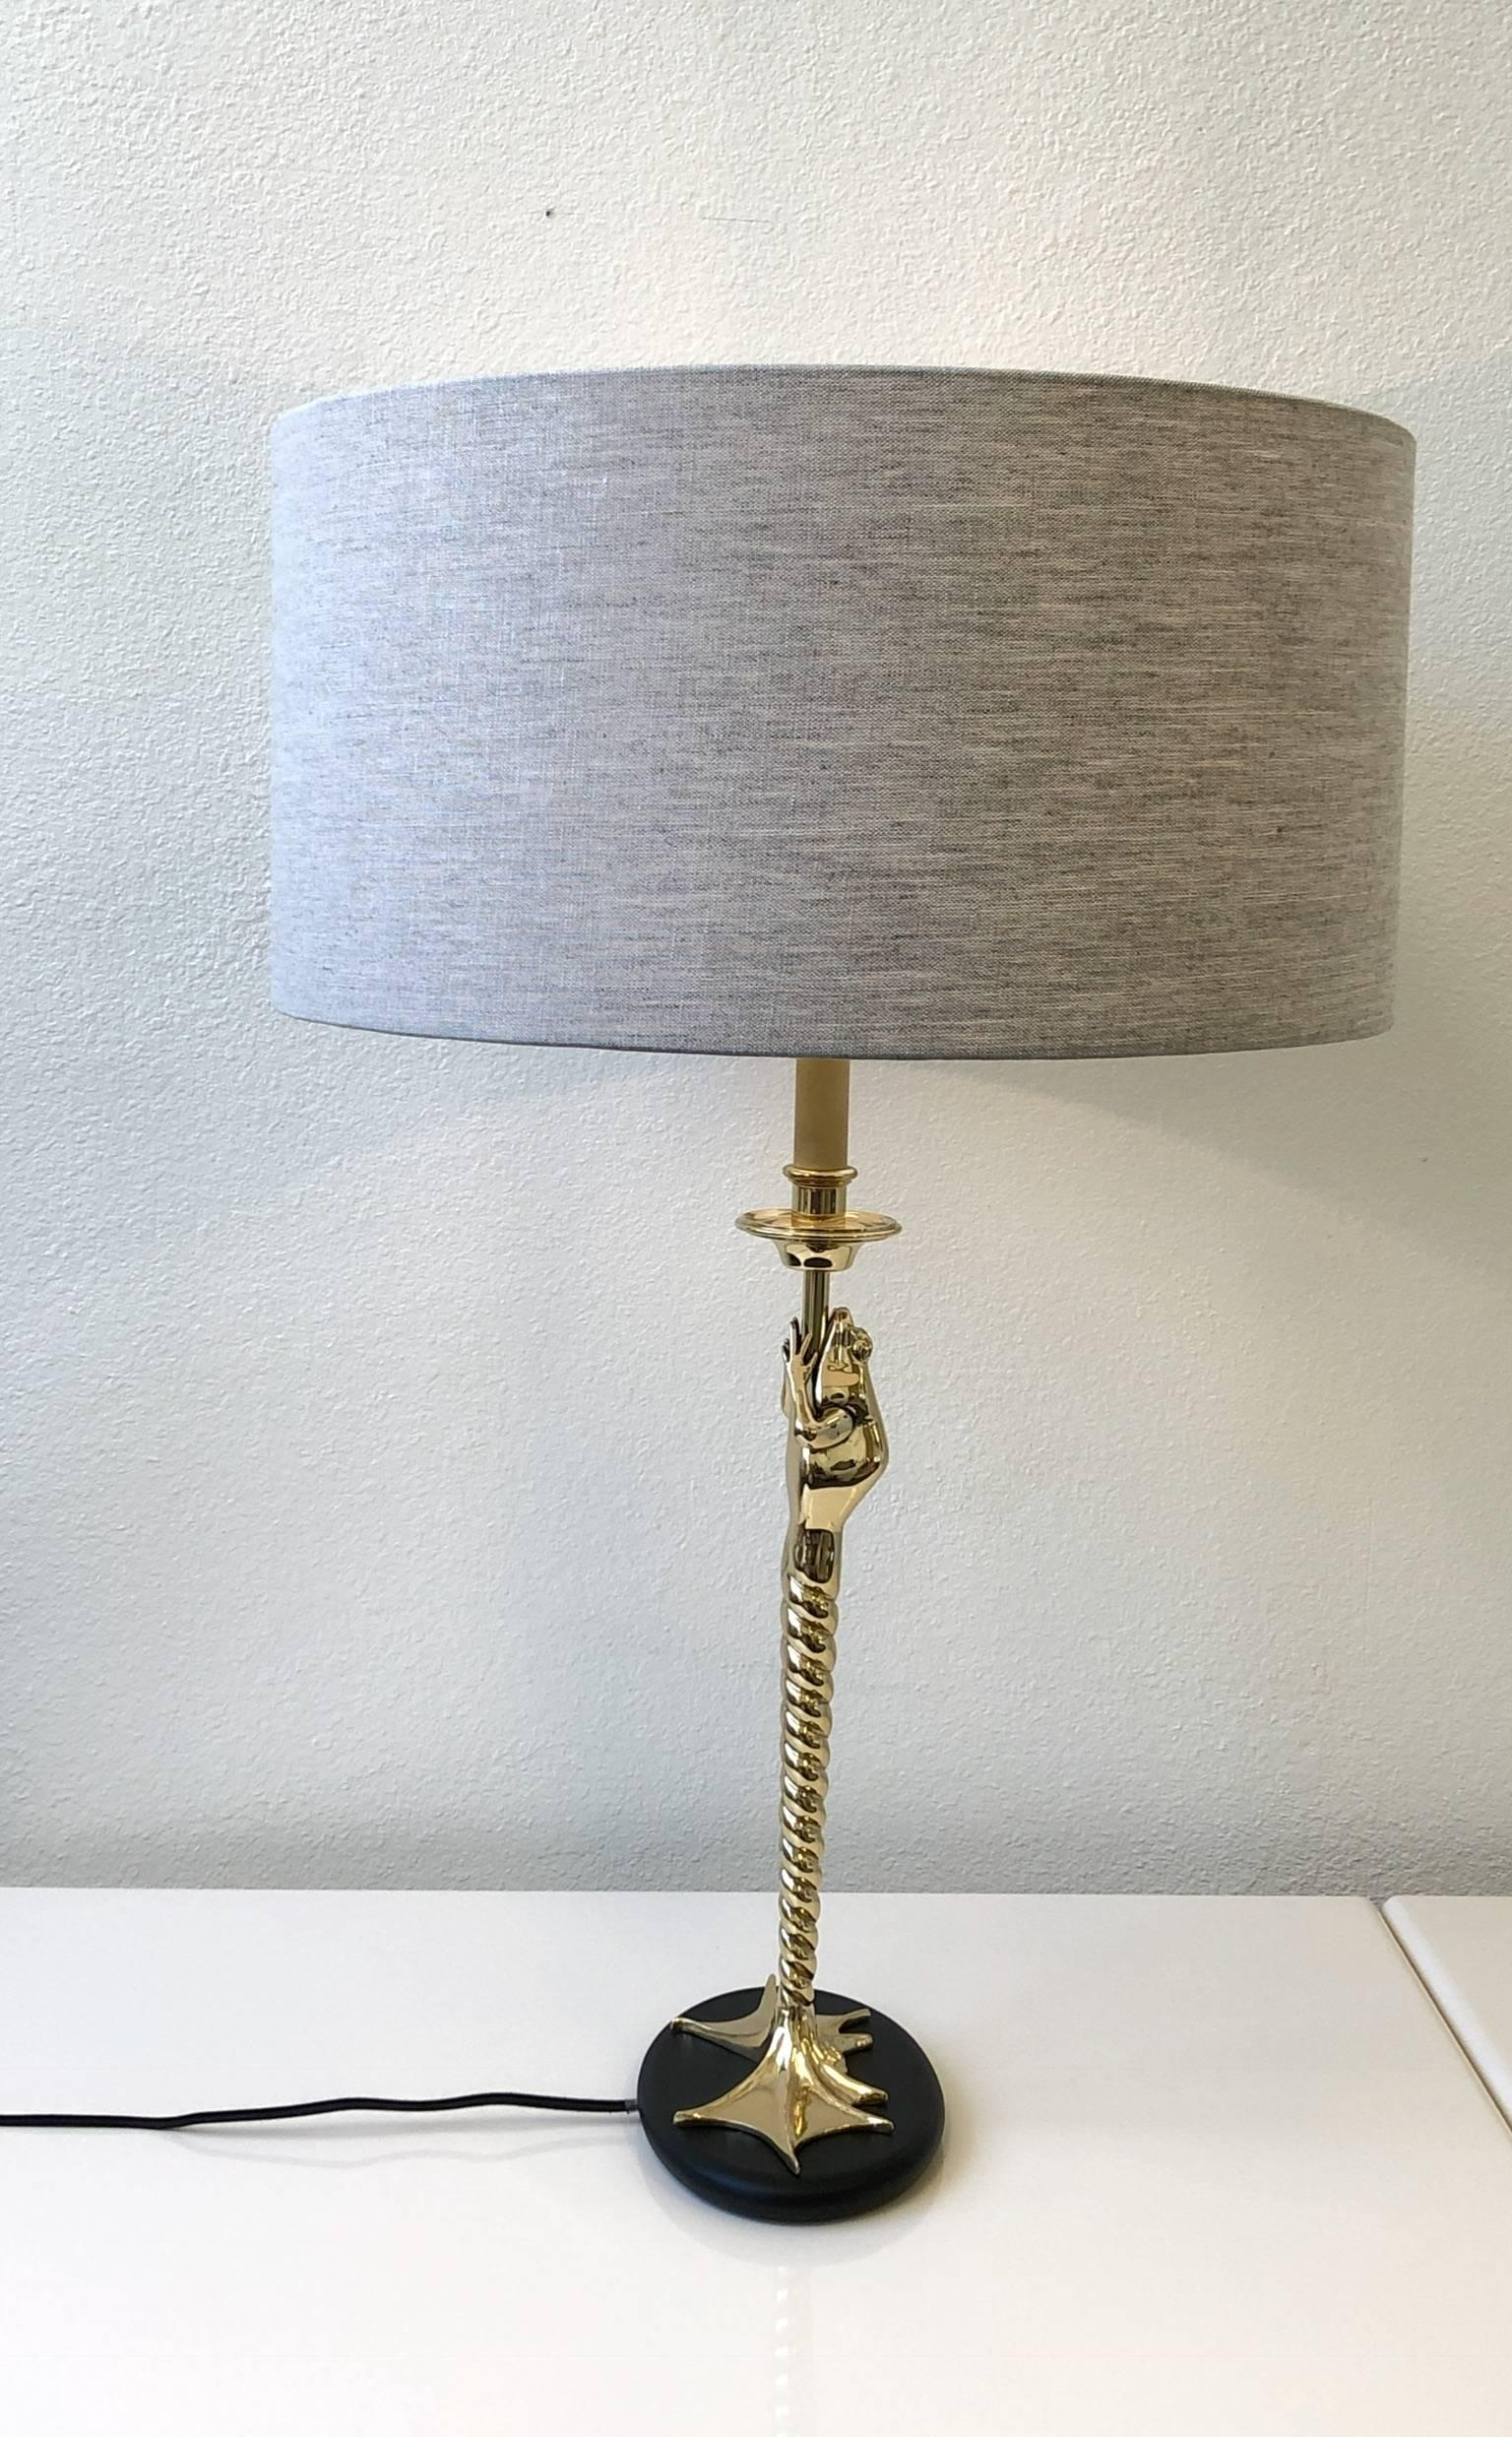 Polished Pair of Brass Frog Table Lamps by Chapman